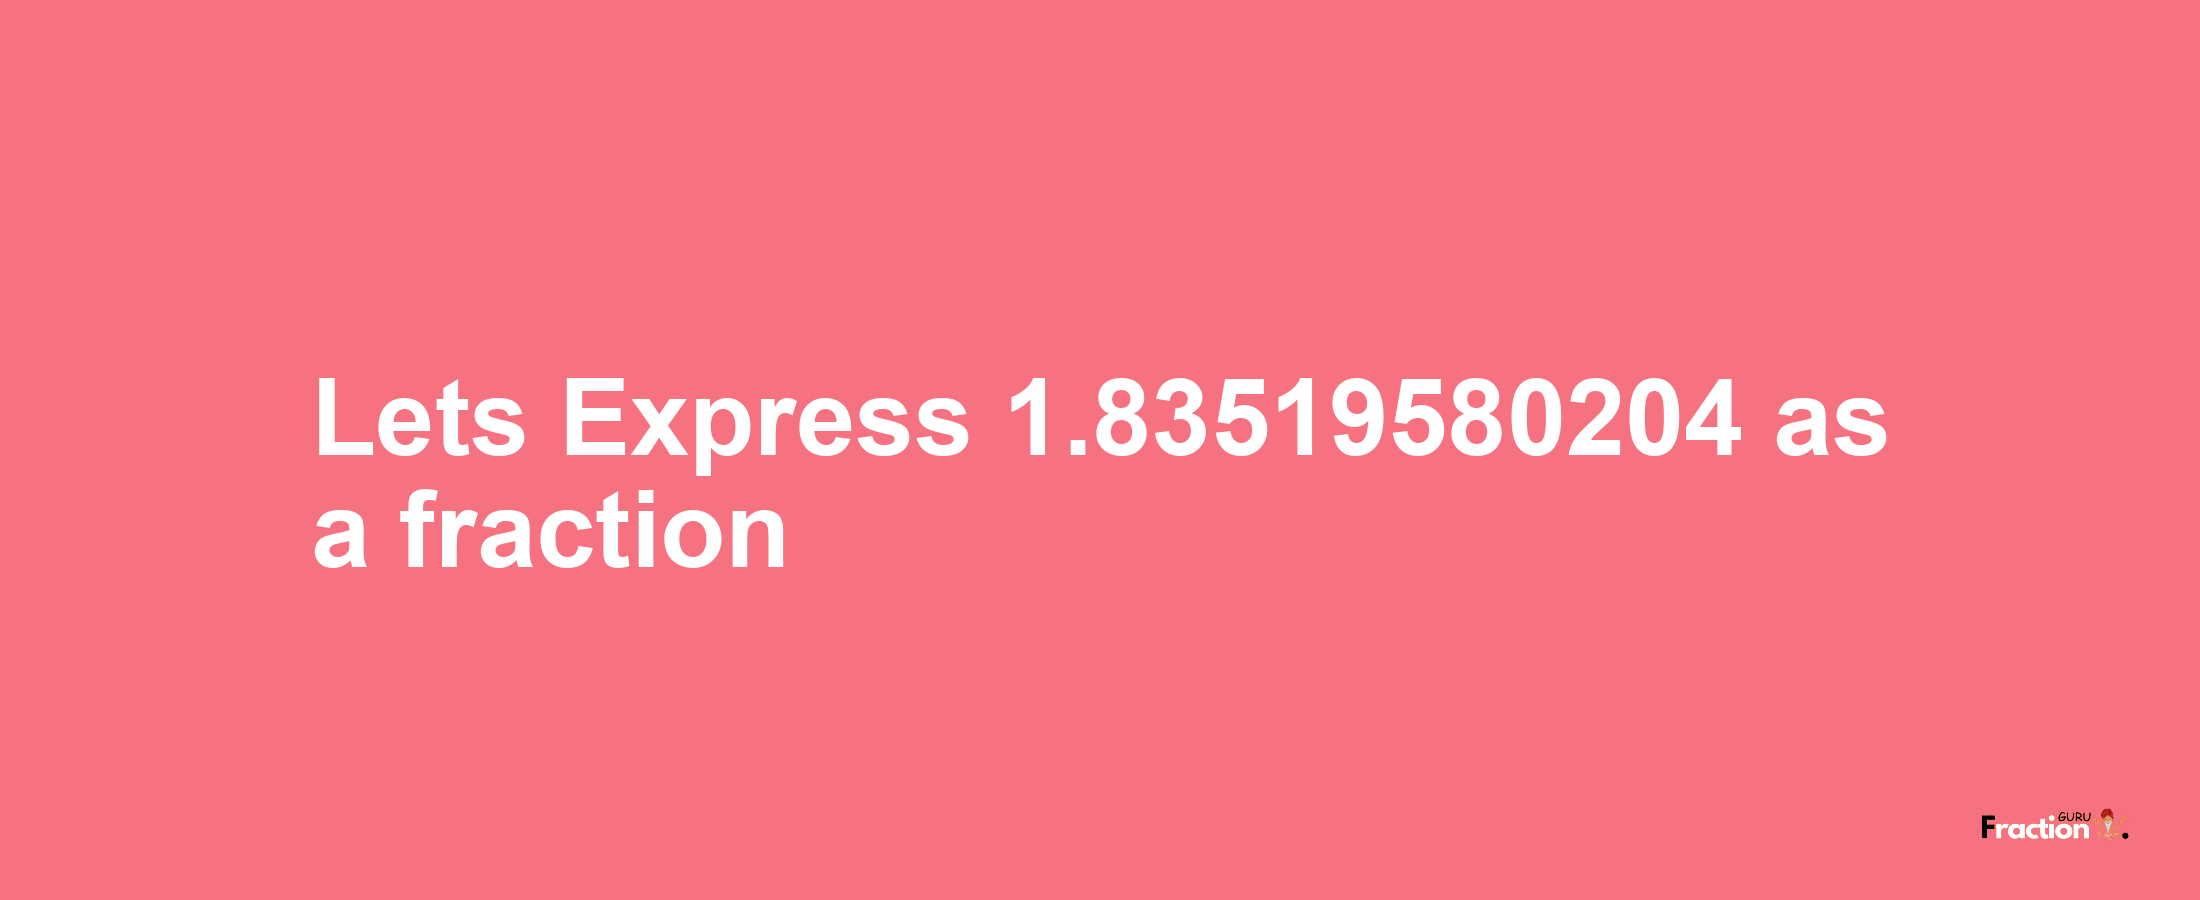 Lets Express 1.83519580204 as afraction